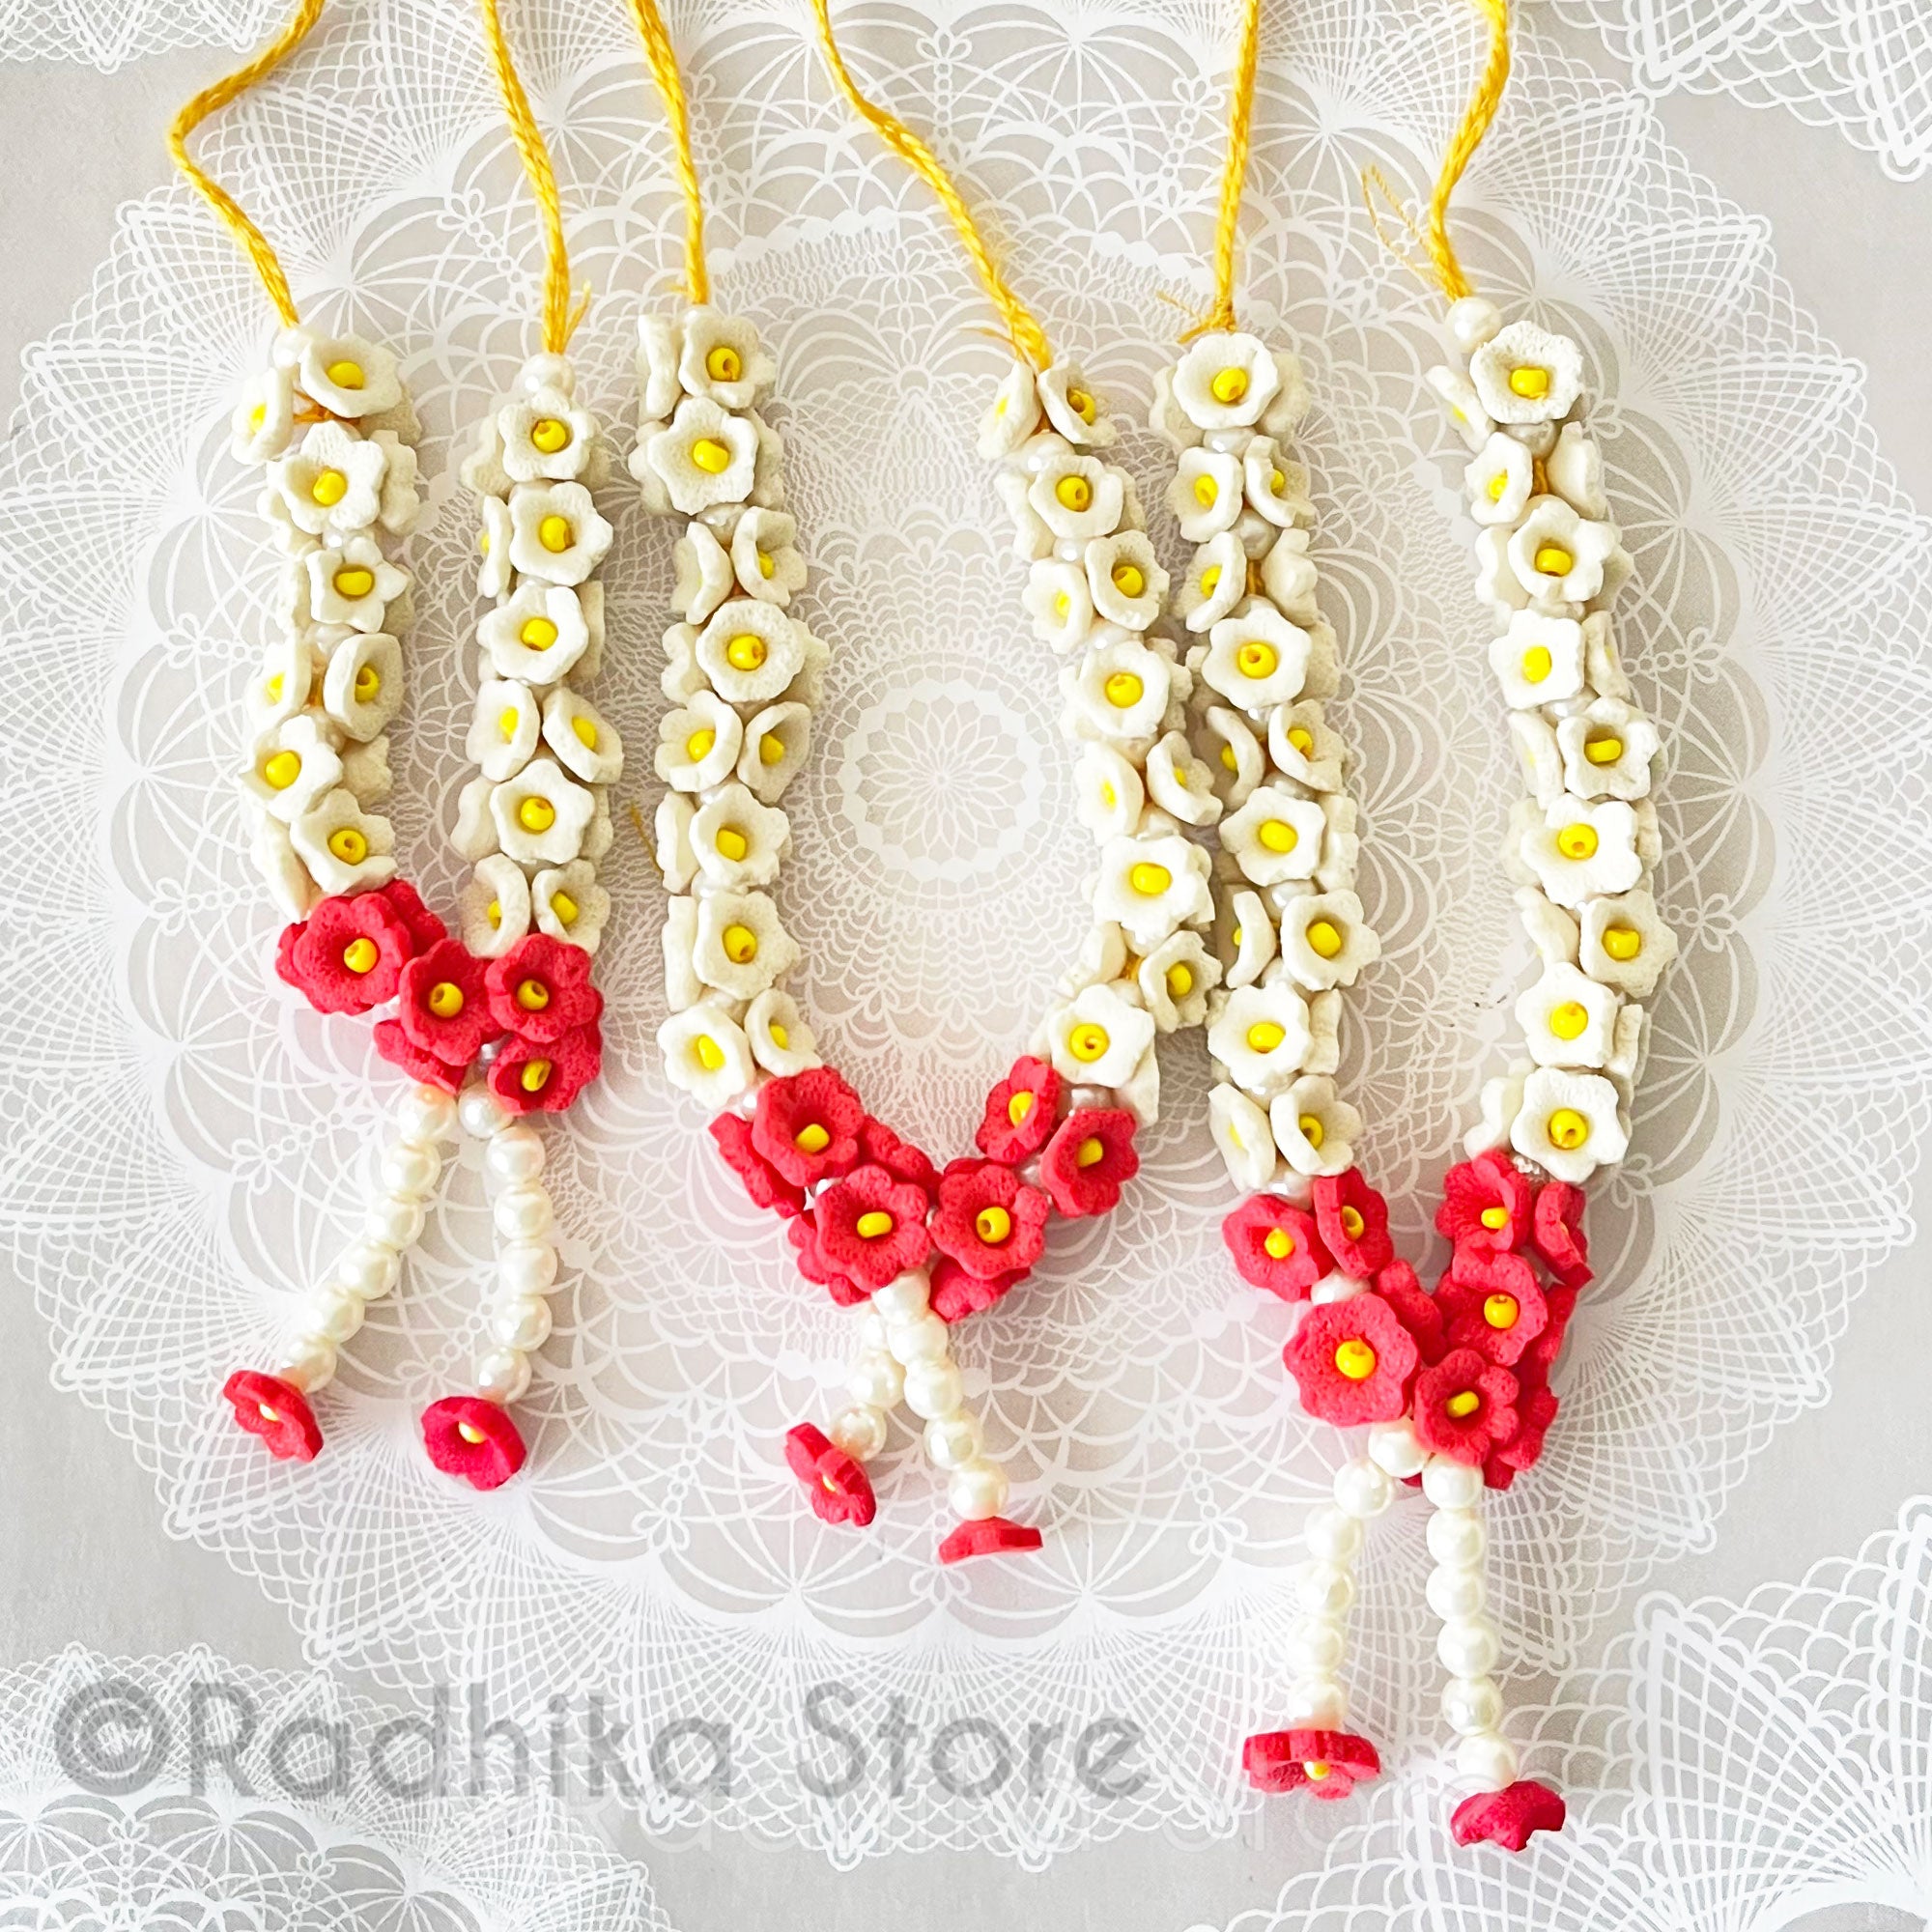 Cream White And Red With Yellow Center - Deity Garland -Flower Jewelry - Choose Size -